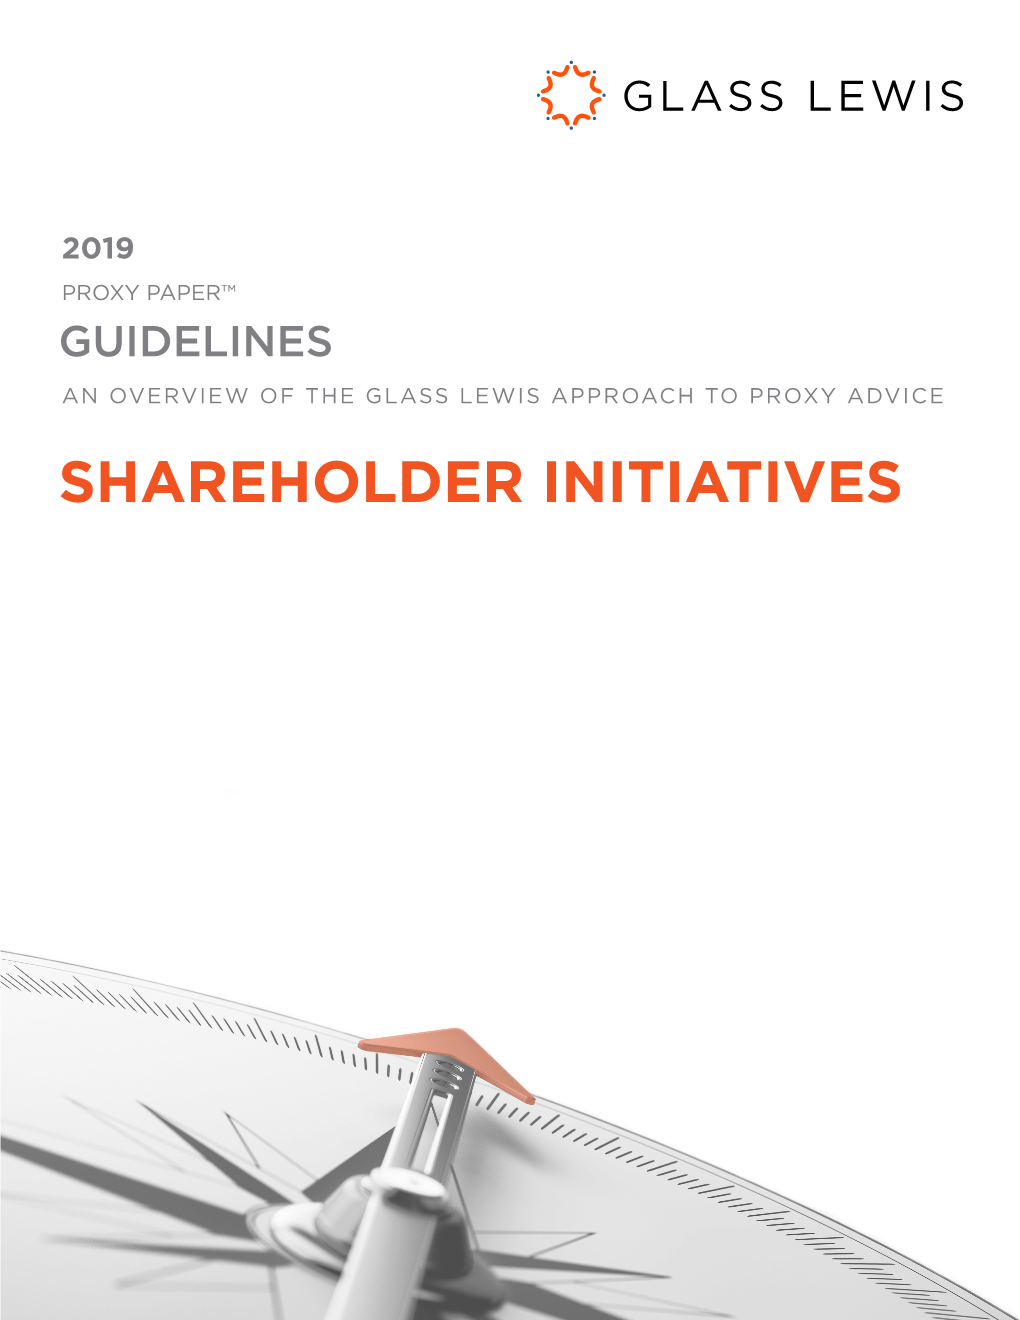 SHAREHOLDER INITIATIVES Table of Contents